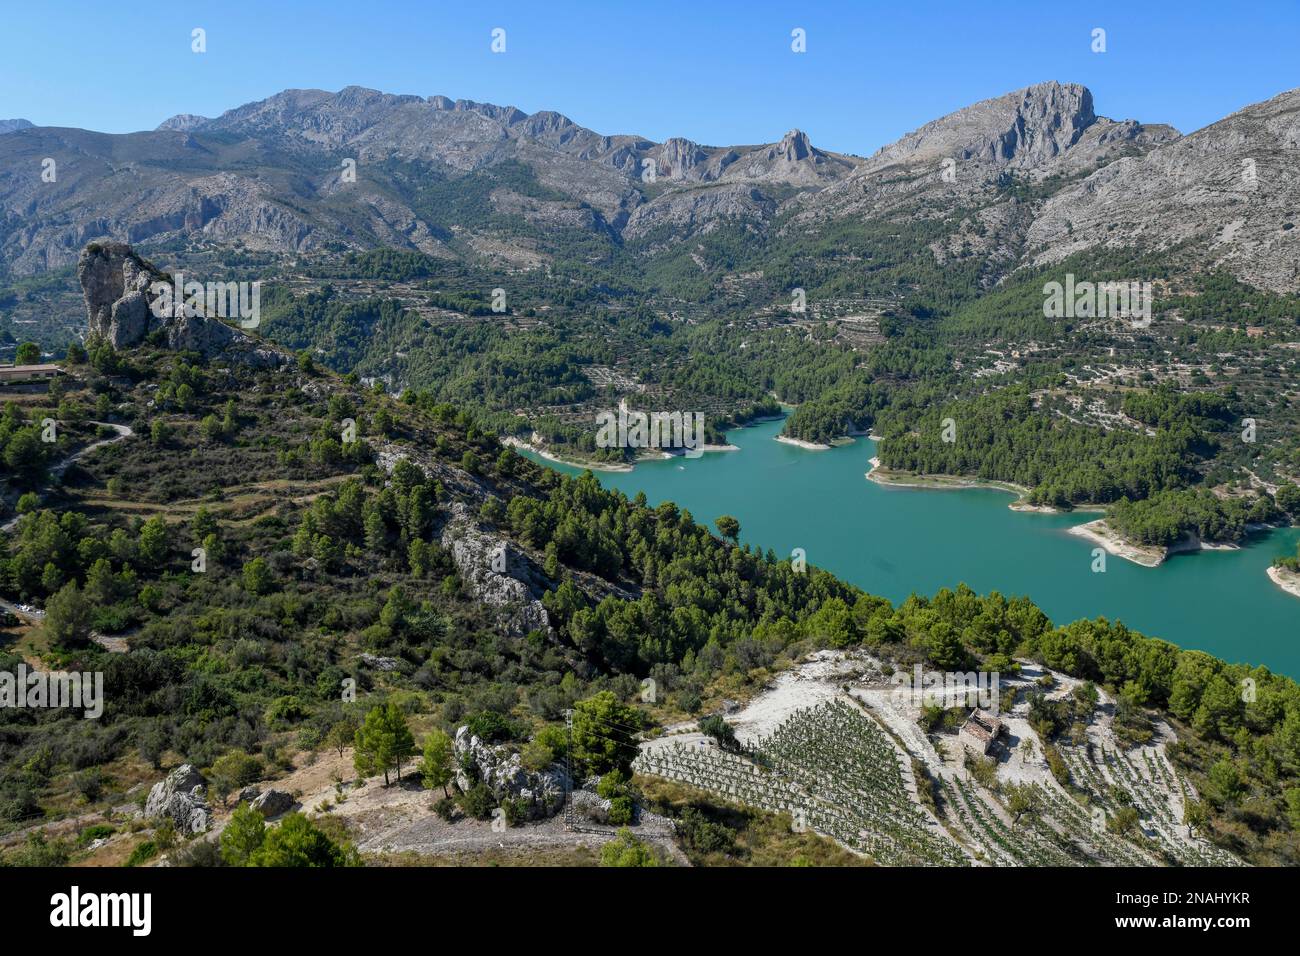 View from Castell de Guadalest to the reservoir, Guadalest, Alicante province, Costa Blanca, Spain Stock Photo